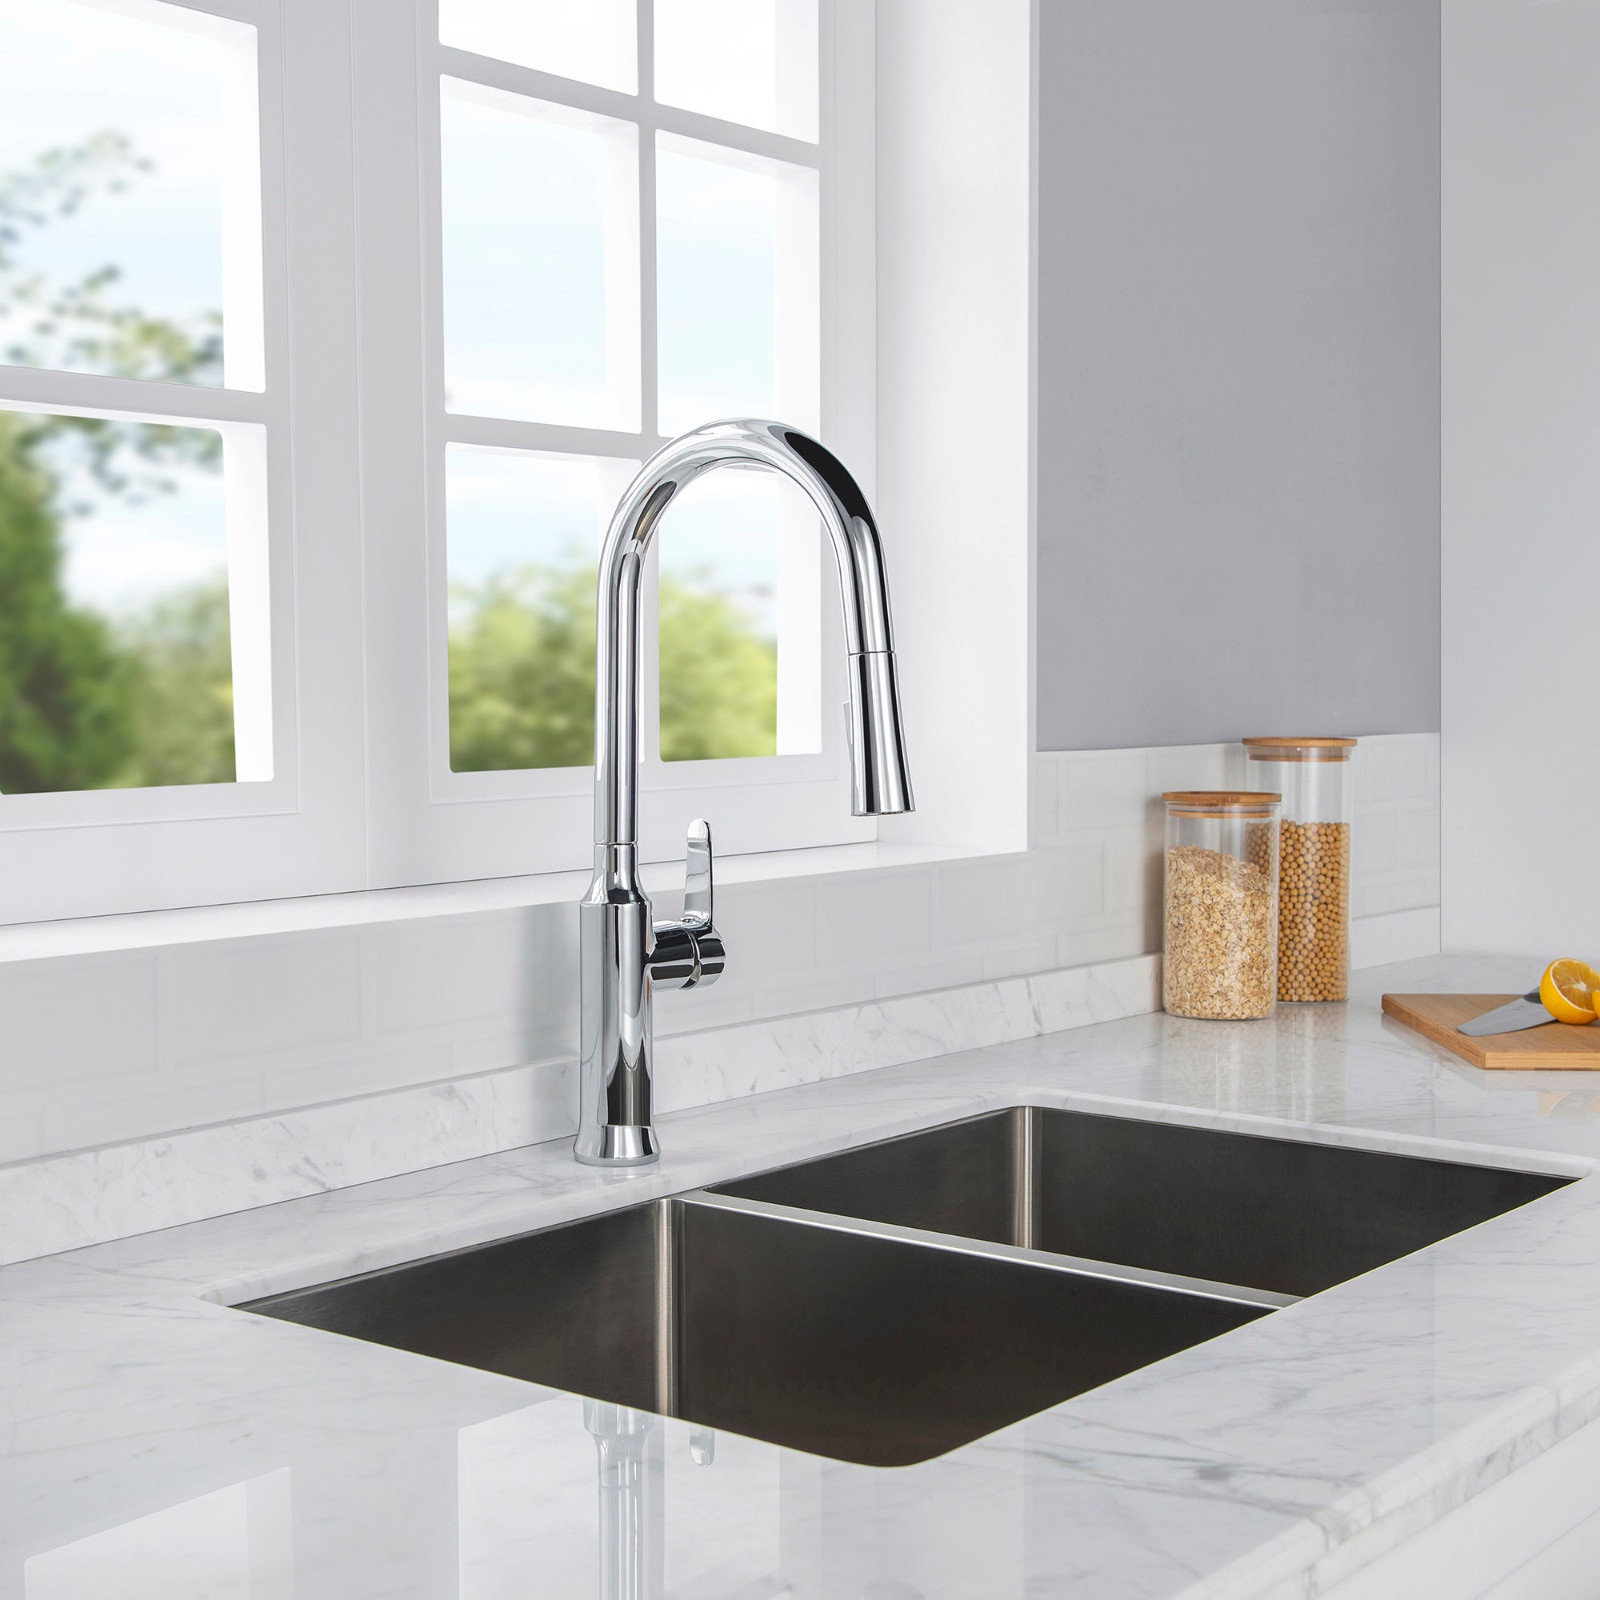  WOODBRIDGE WK030102CH Stainless Steel Single Handle Pre-Rinse Kitchen Faucet with Pull Down Sprayer, Chrome Finish_9423